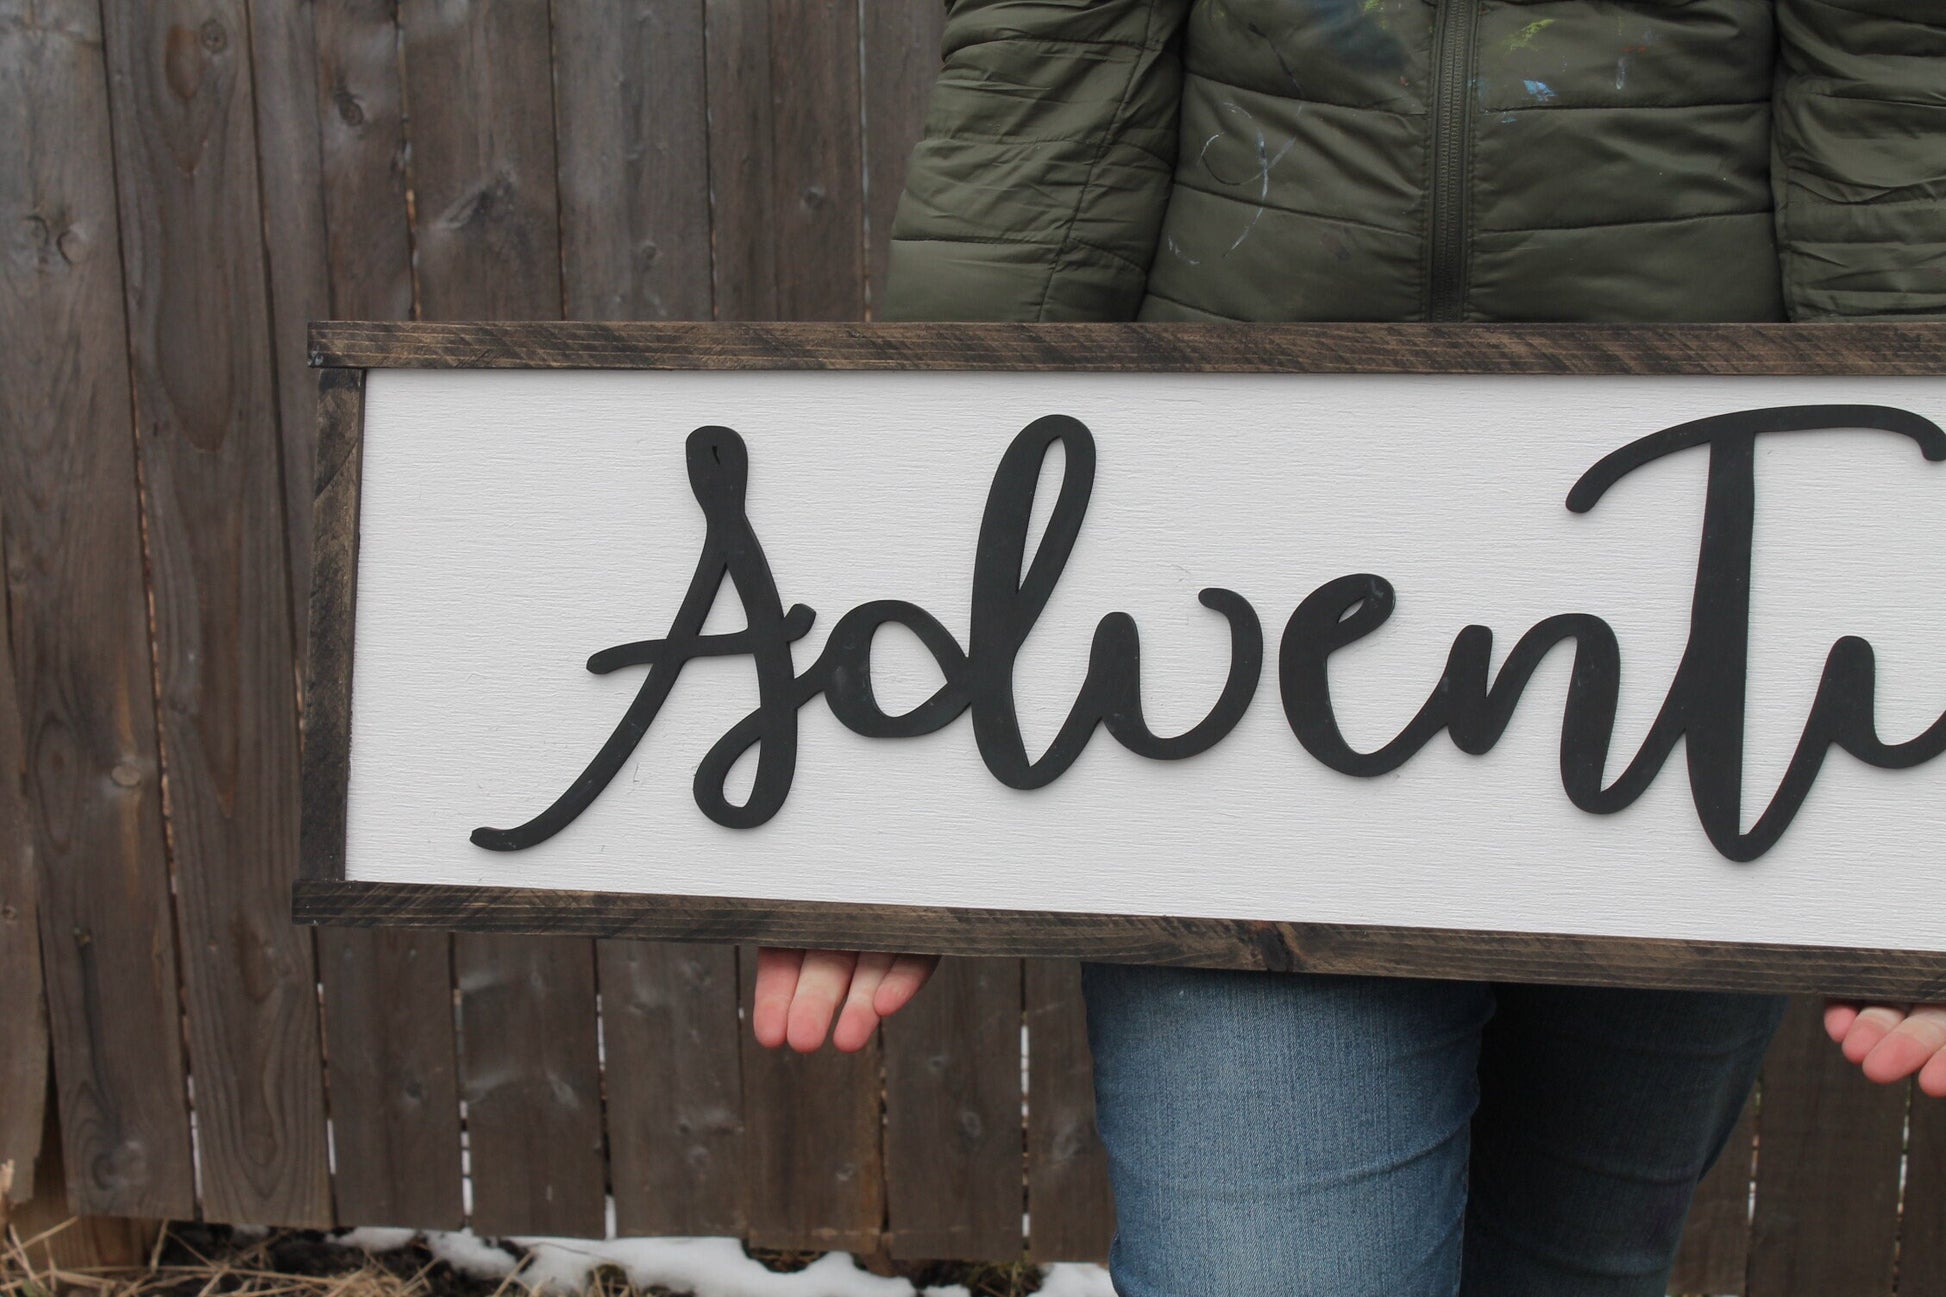 Adventure Wood Sign Wilderness Wild Travel Large Nursery Framed Large Black and White Rustic Primitive Shabby Chic Raised Text